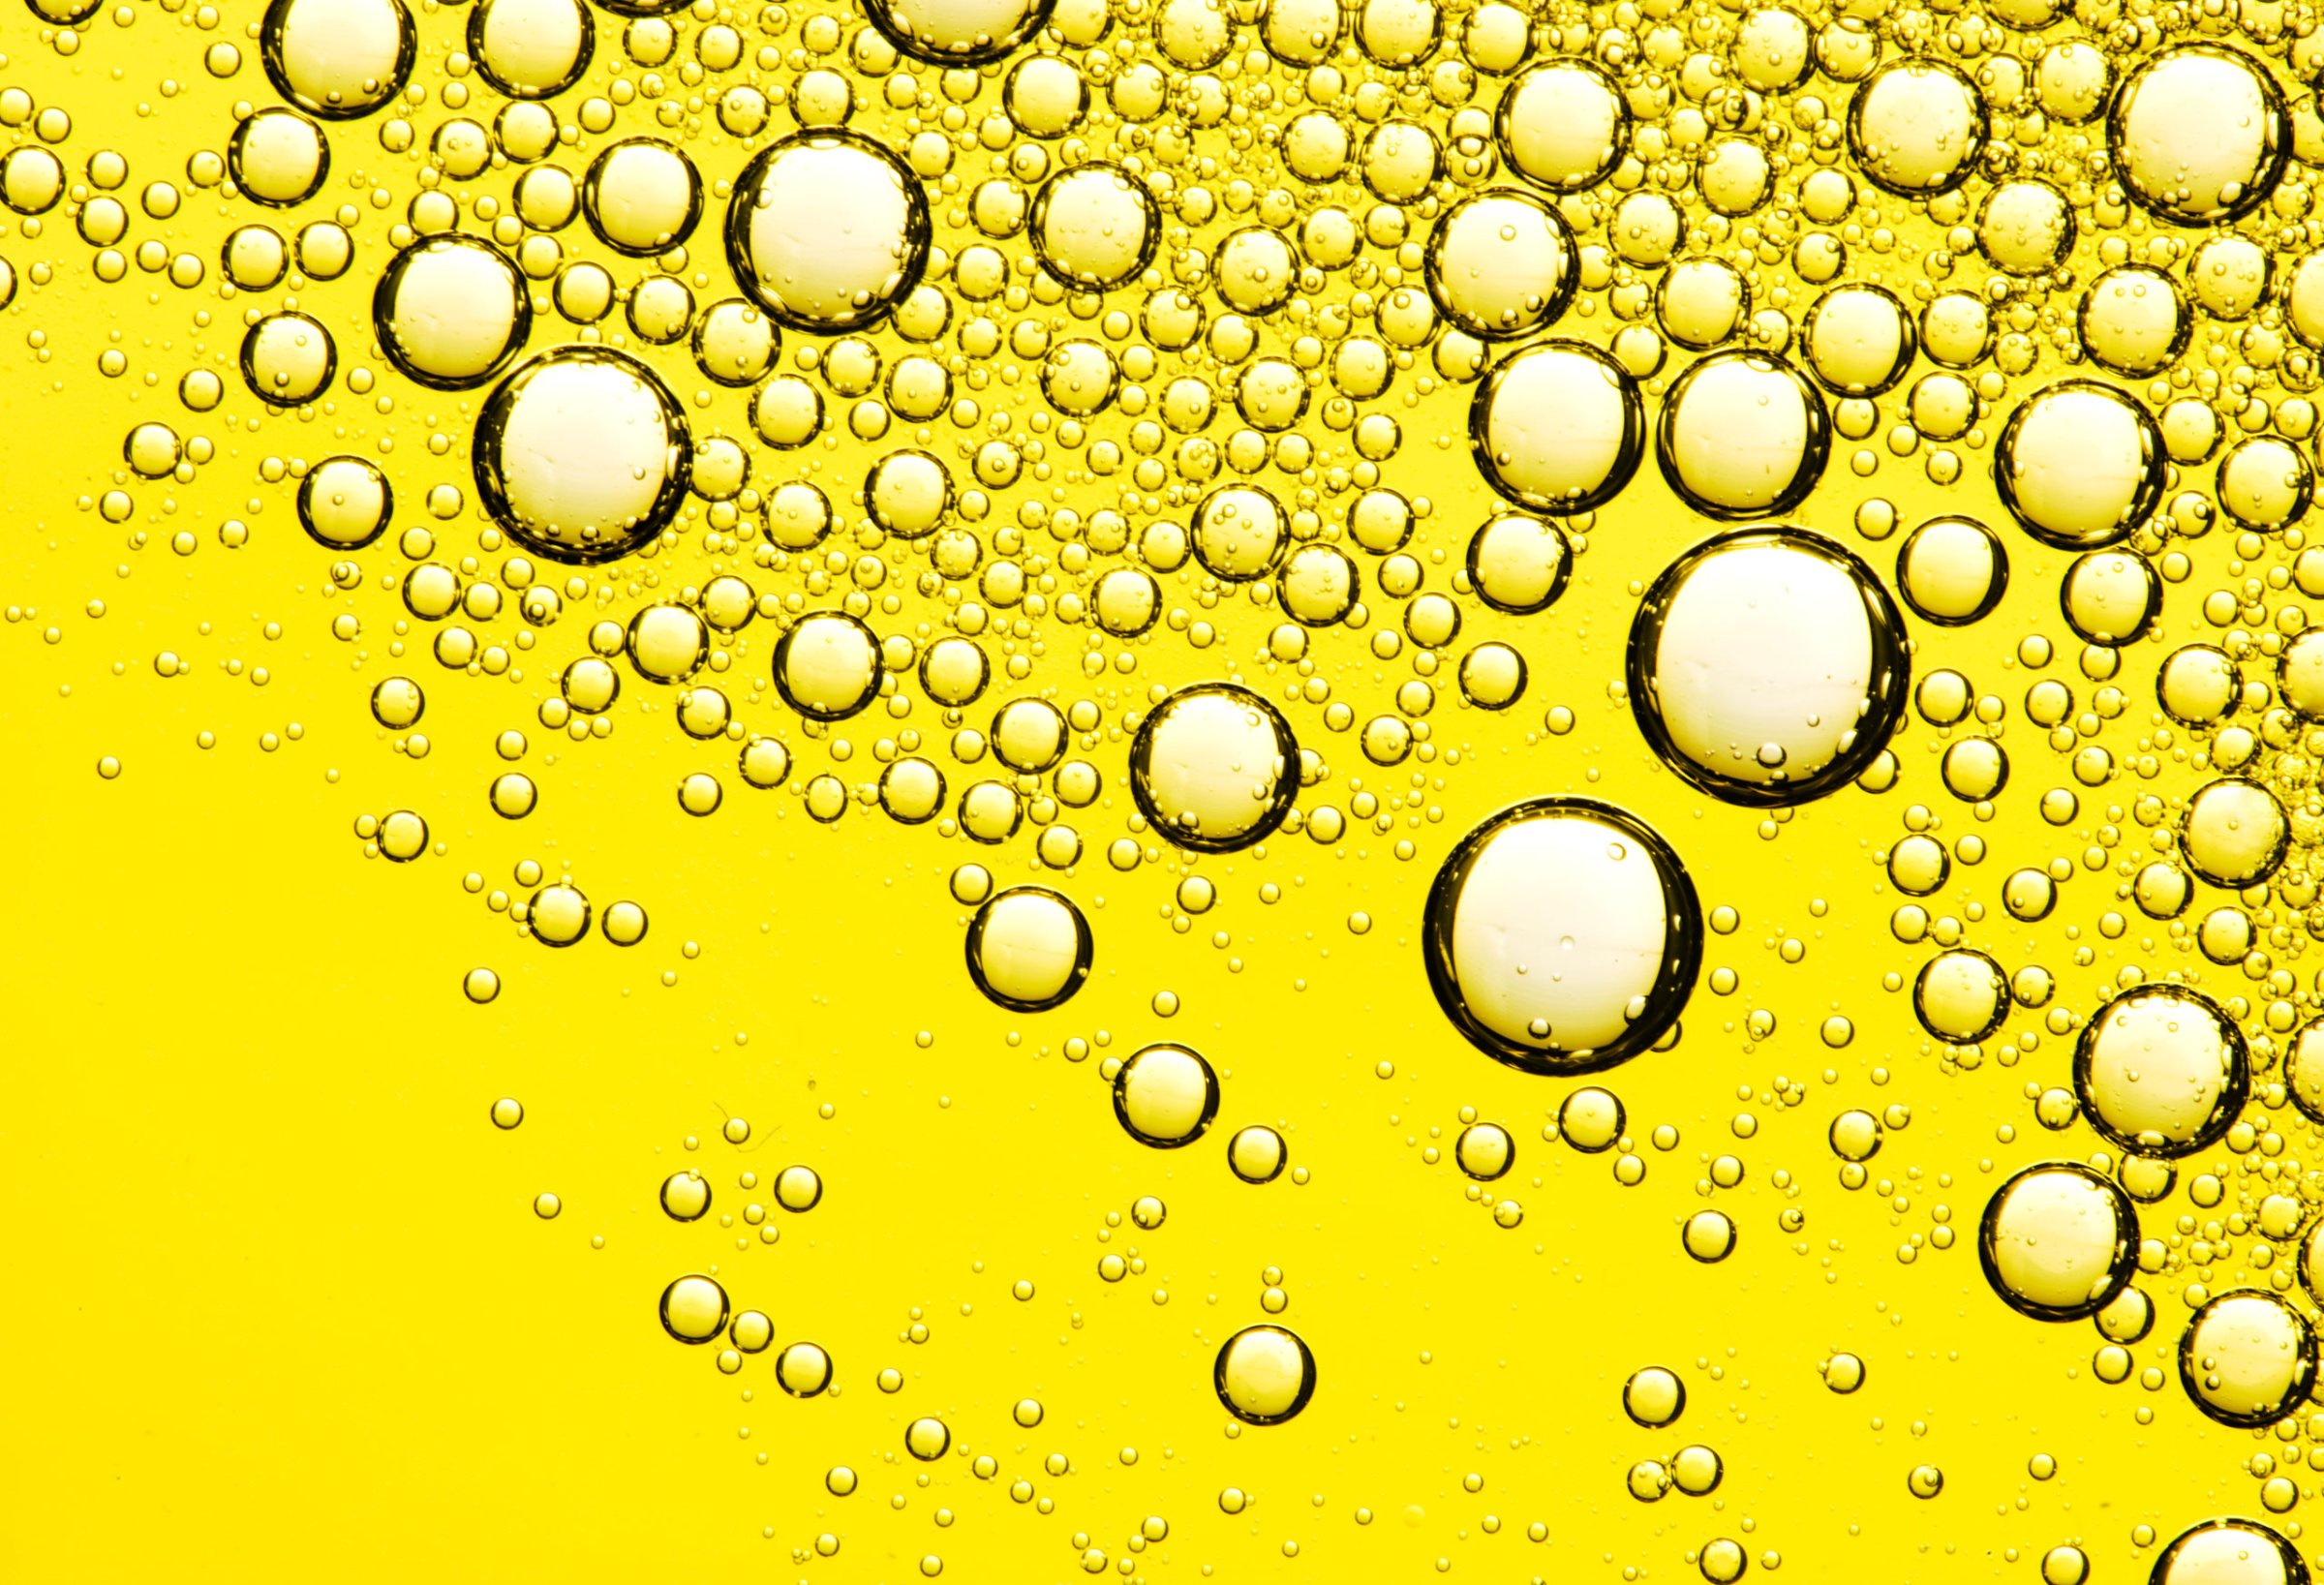 Bubbles in olive oil